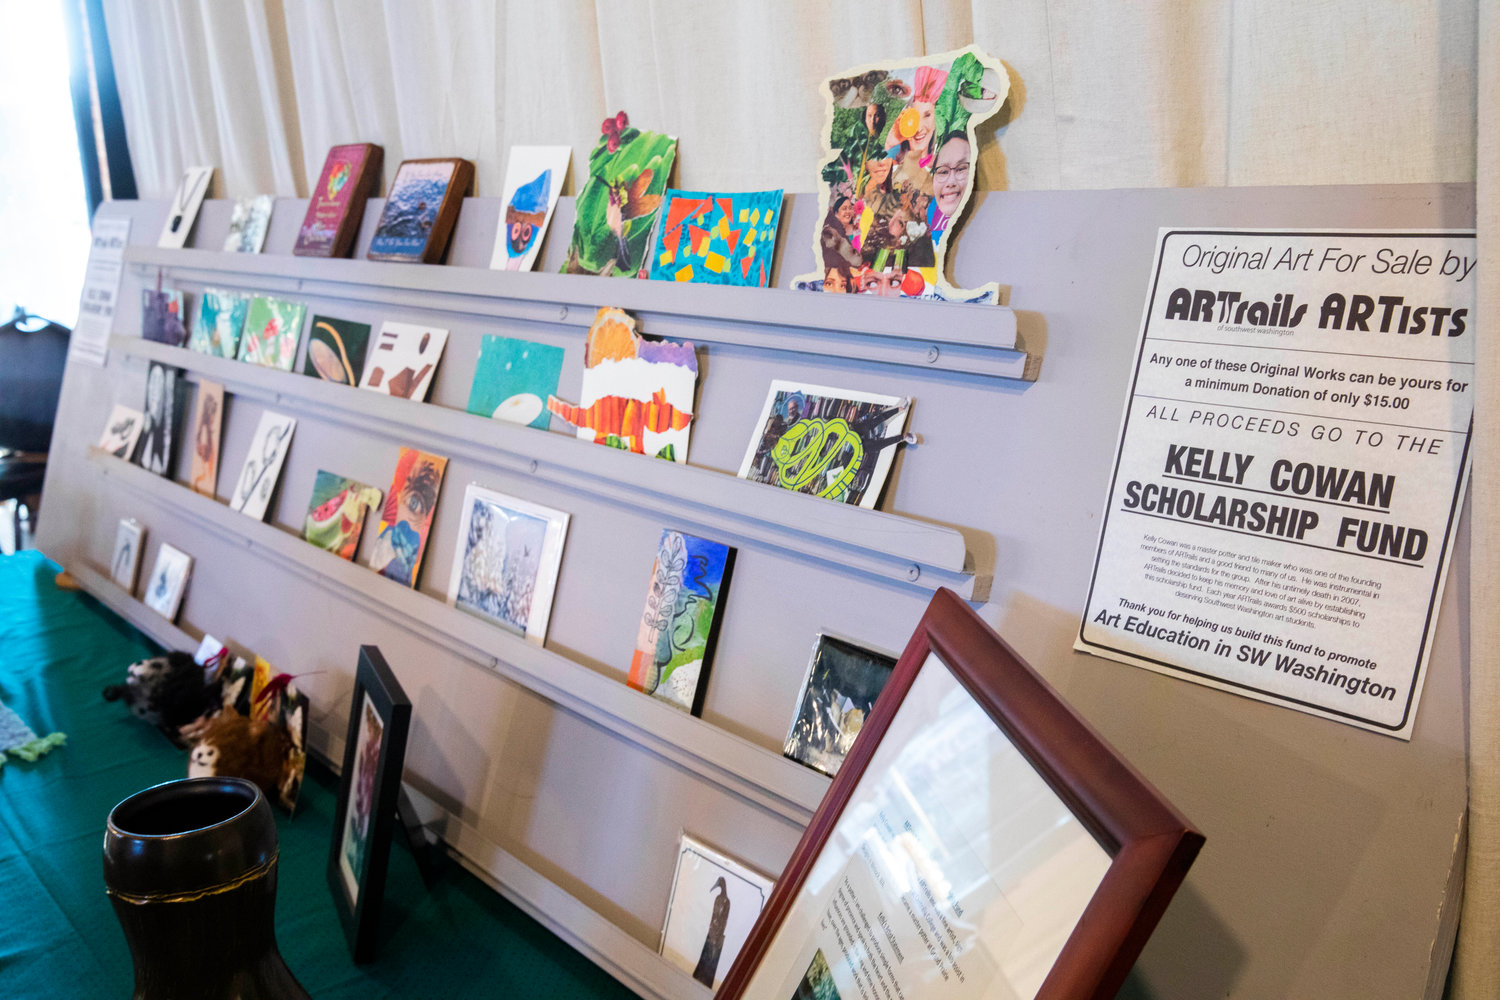 Original art pieces are exchanged by donation with proceeds benefiting the Kelly Cowan Scholarship Fund.